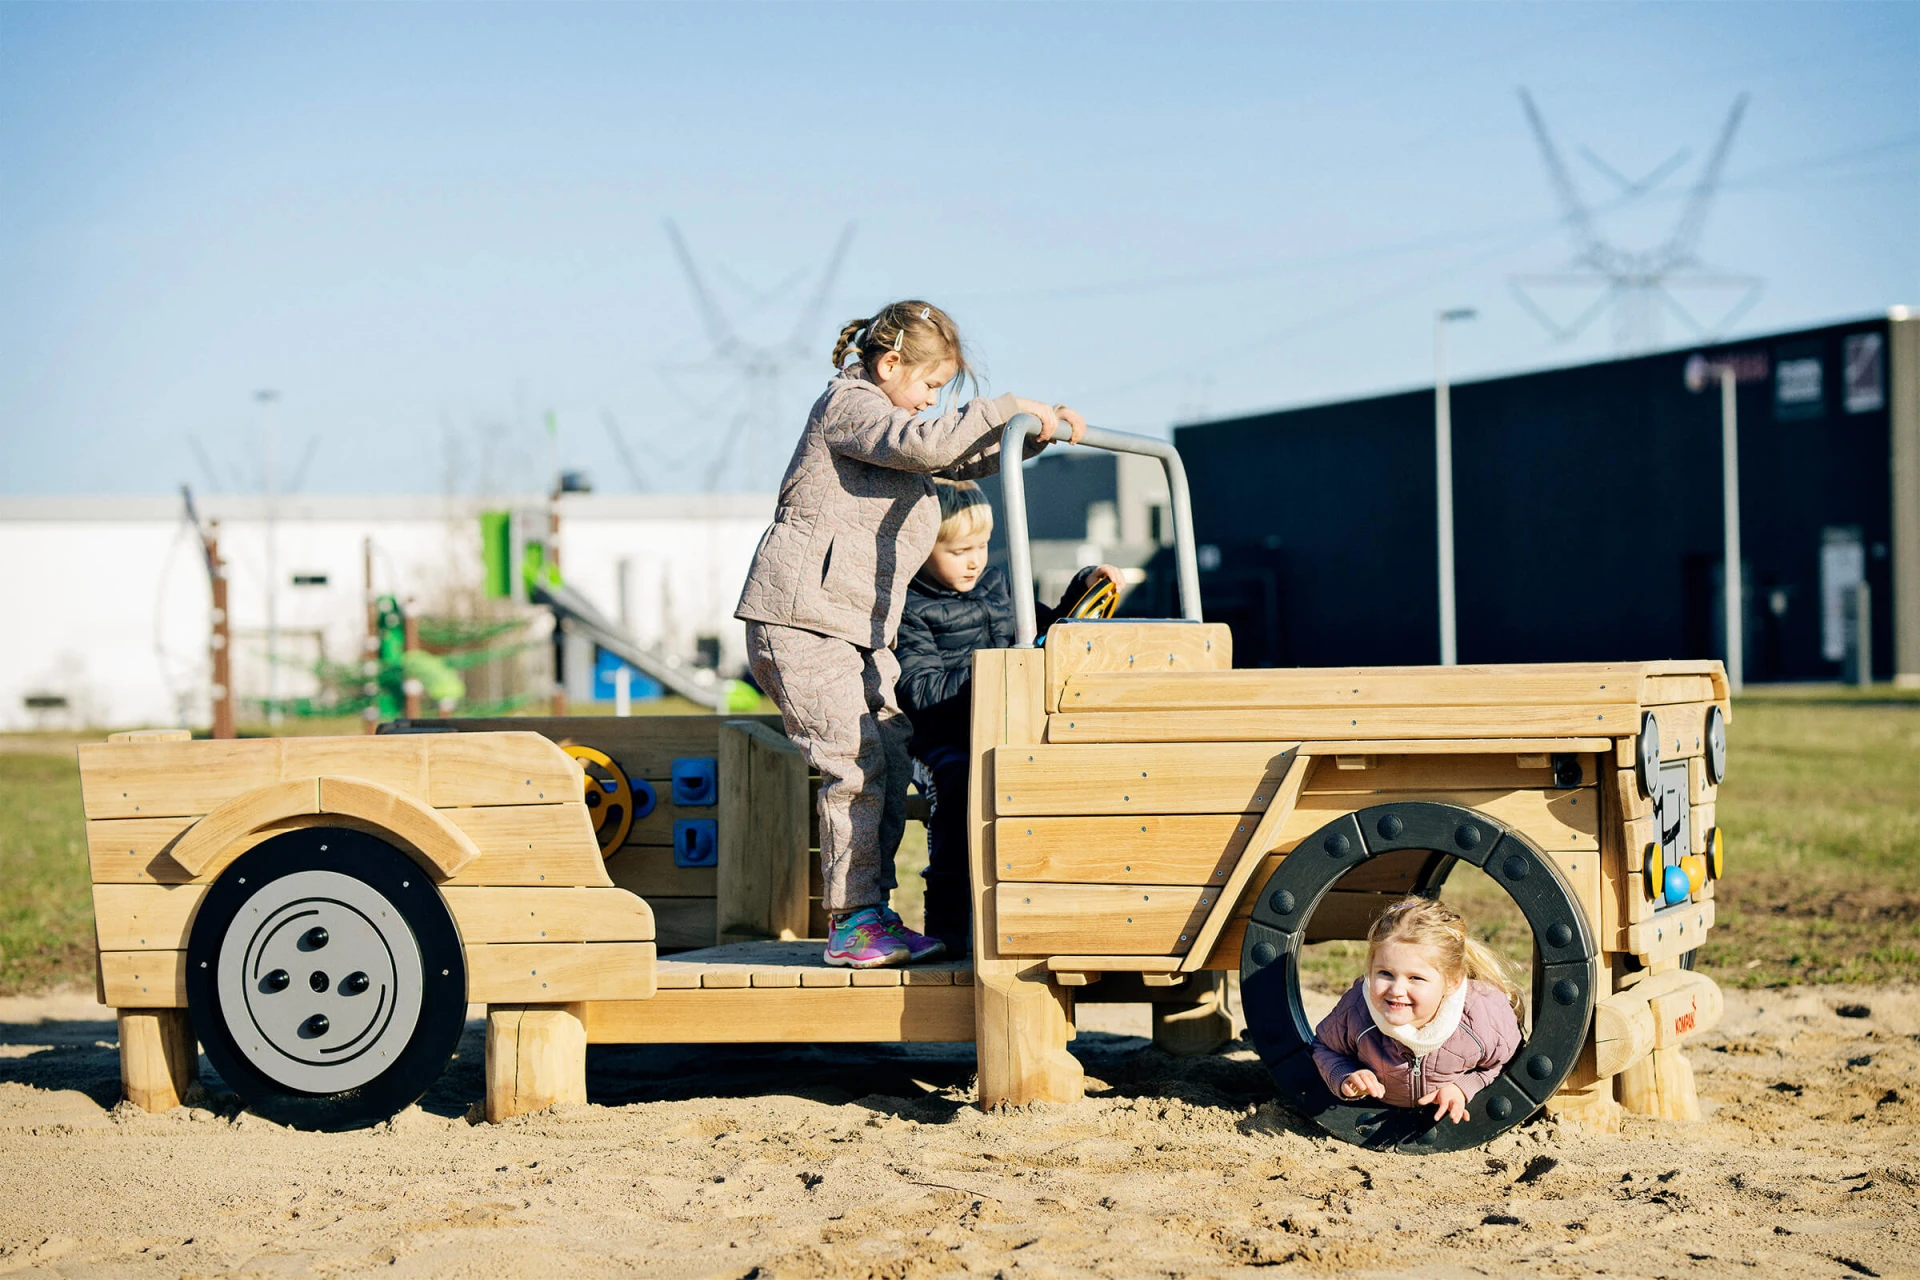 Kids playing on a themed wooden playground car 